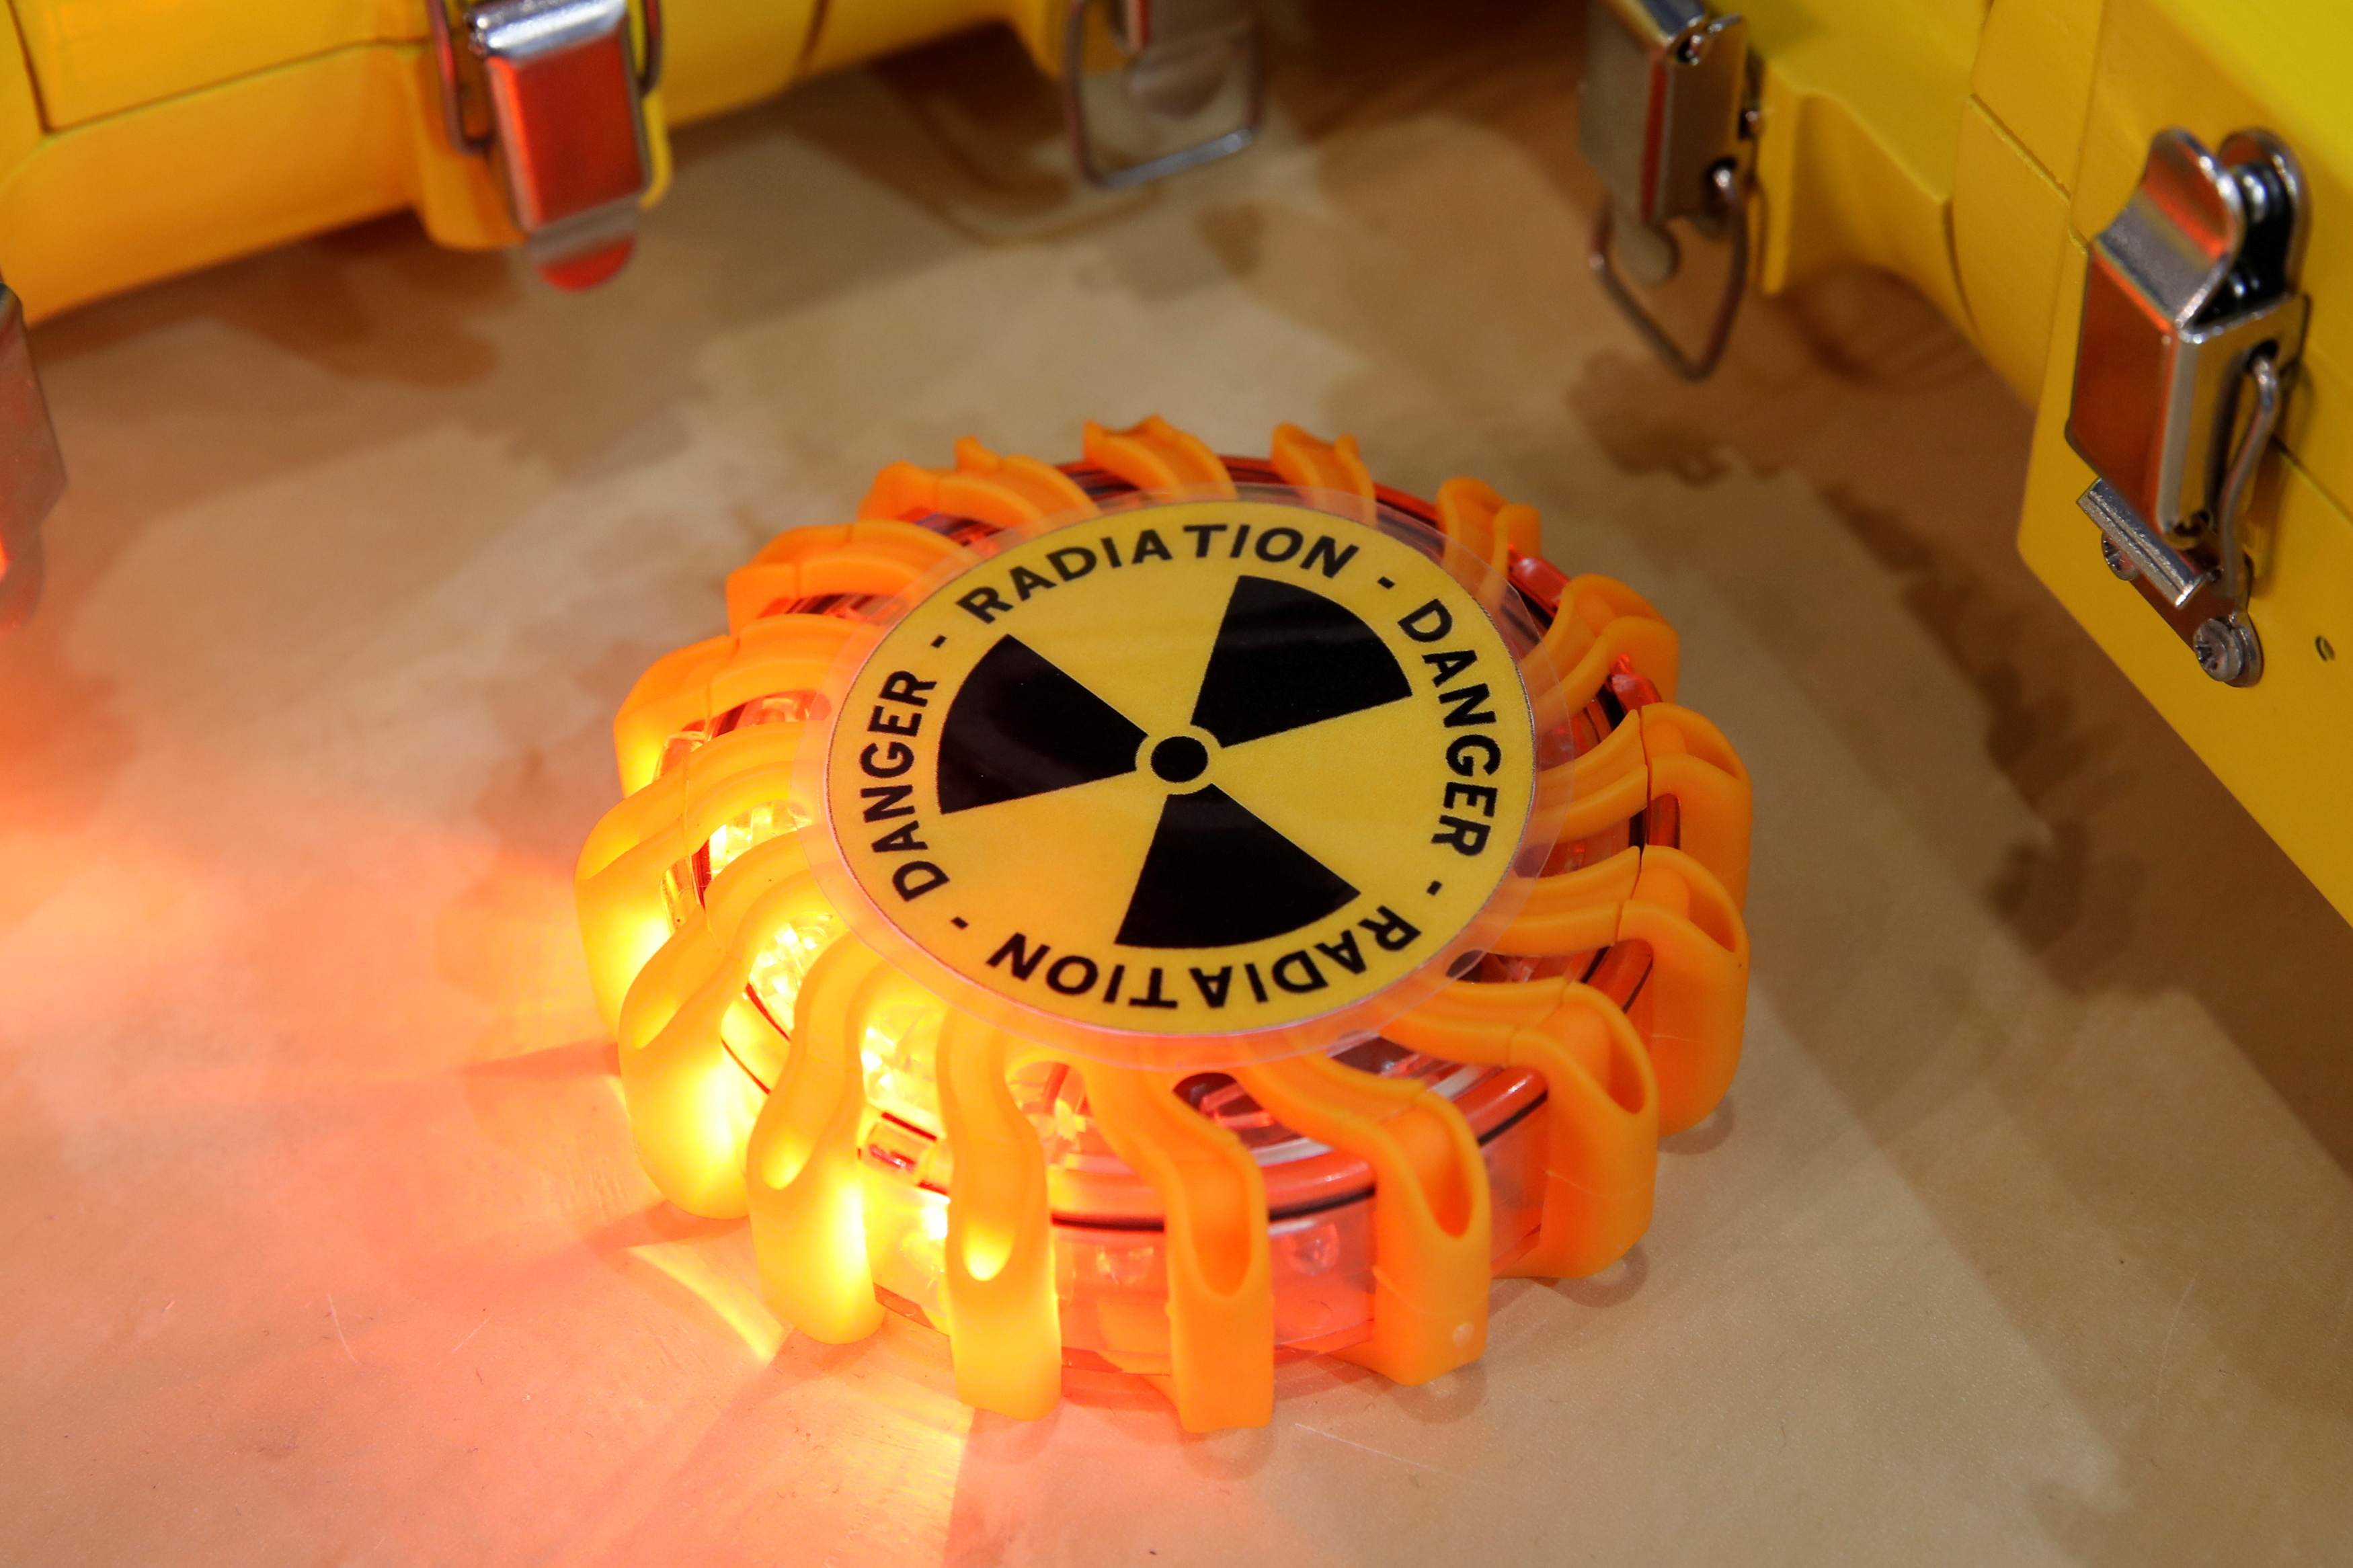 A radioactivity symbol is pictured at the World Nuclear Exhibition (WNE), the trade fair event for the global nuclear community in Villepinte